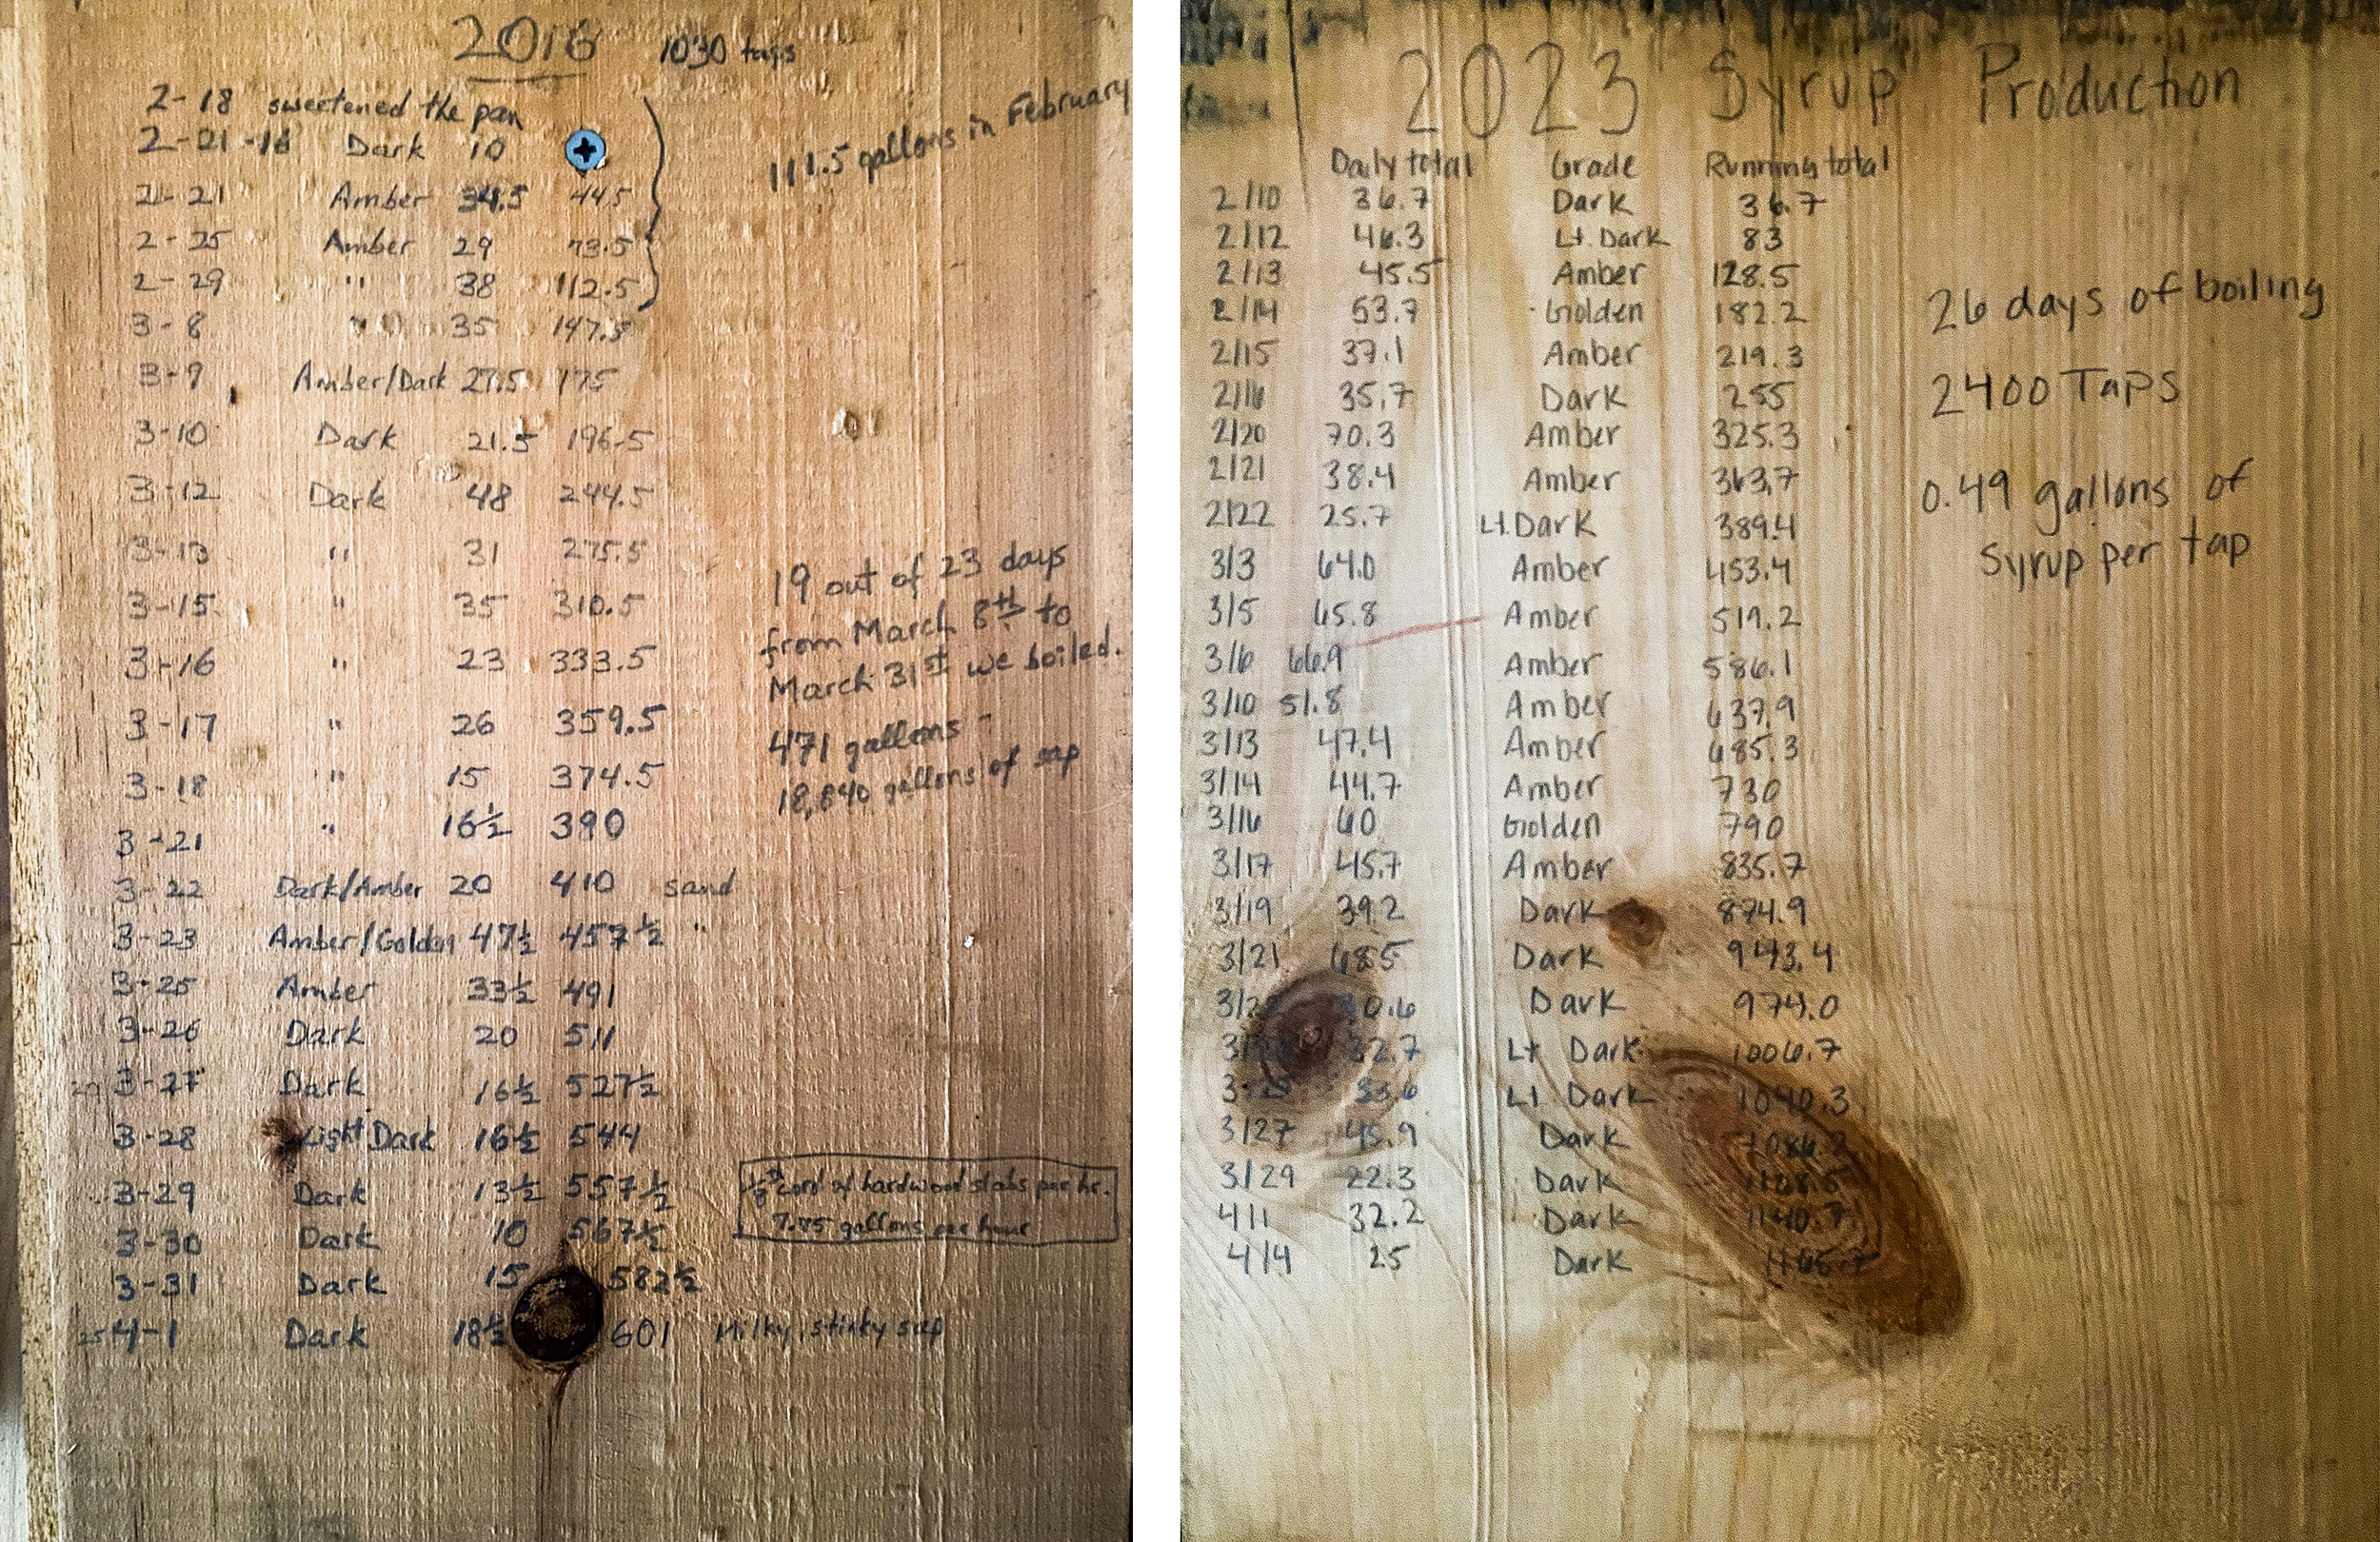 two wooden boards with penciled lists of dates of sugaring and amount of syrup made